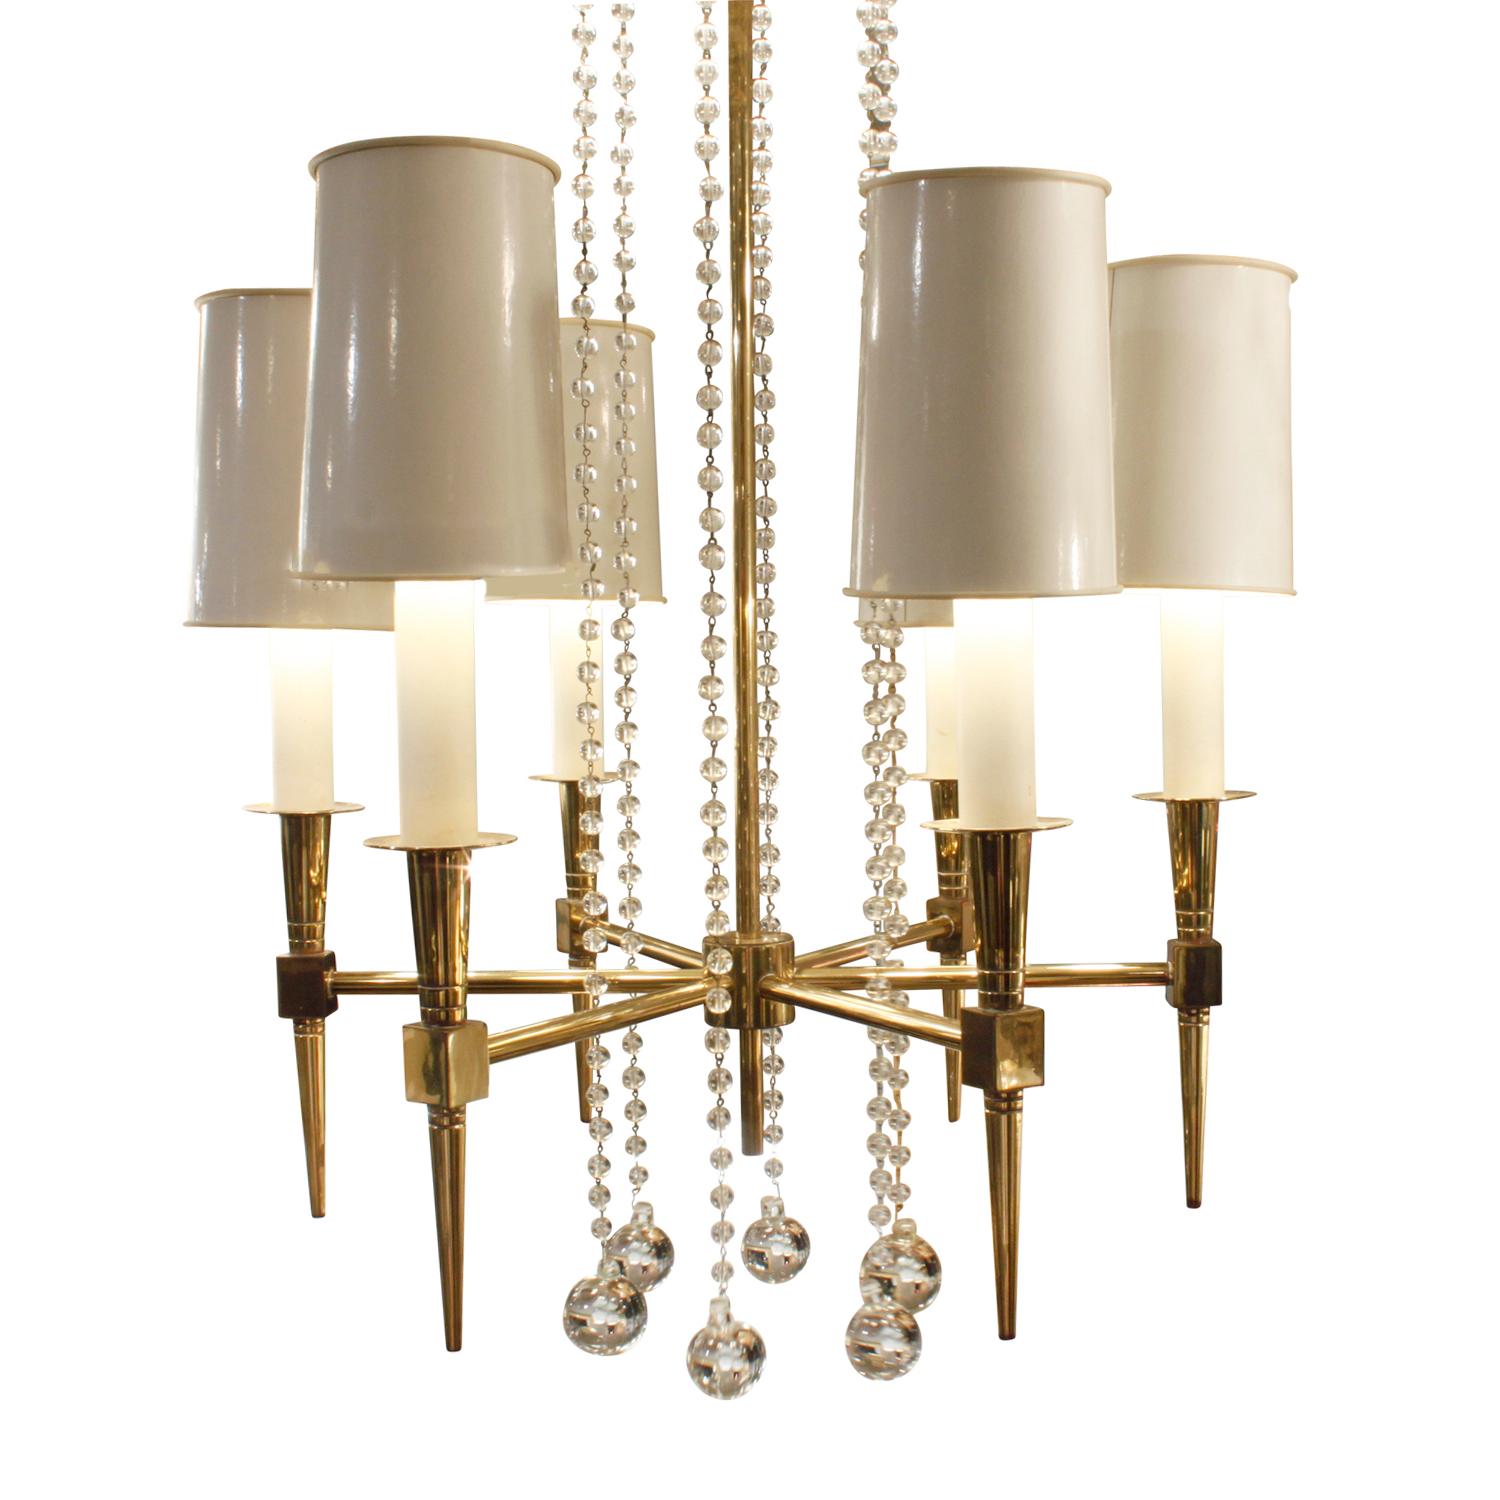 Elegant 6-arm chandelier model no 1 in brass with suspended crystal beads by Tommi Parzinger for Parzinger Originals, American 1950s. This is an iconic Tommi Parzinger chandelier.